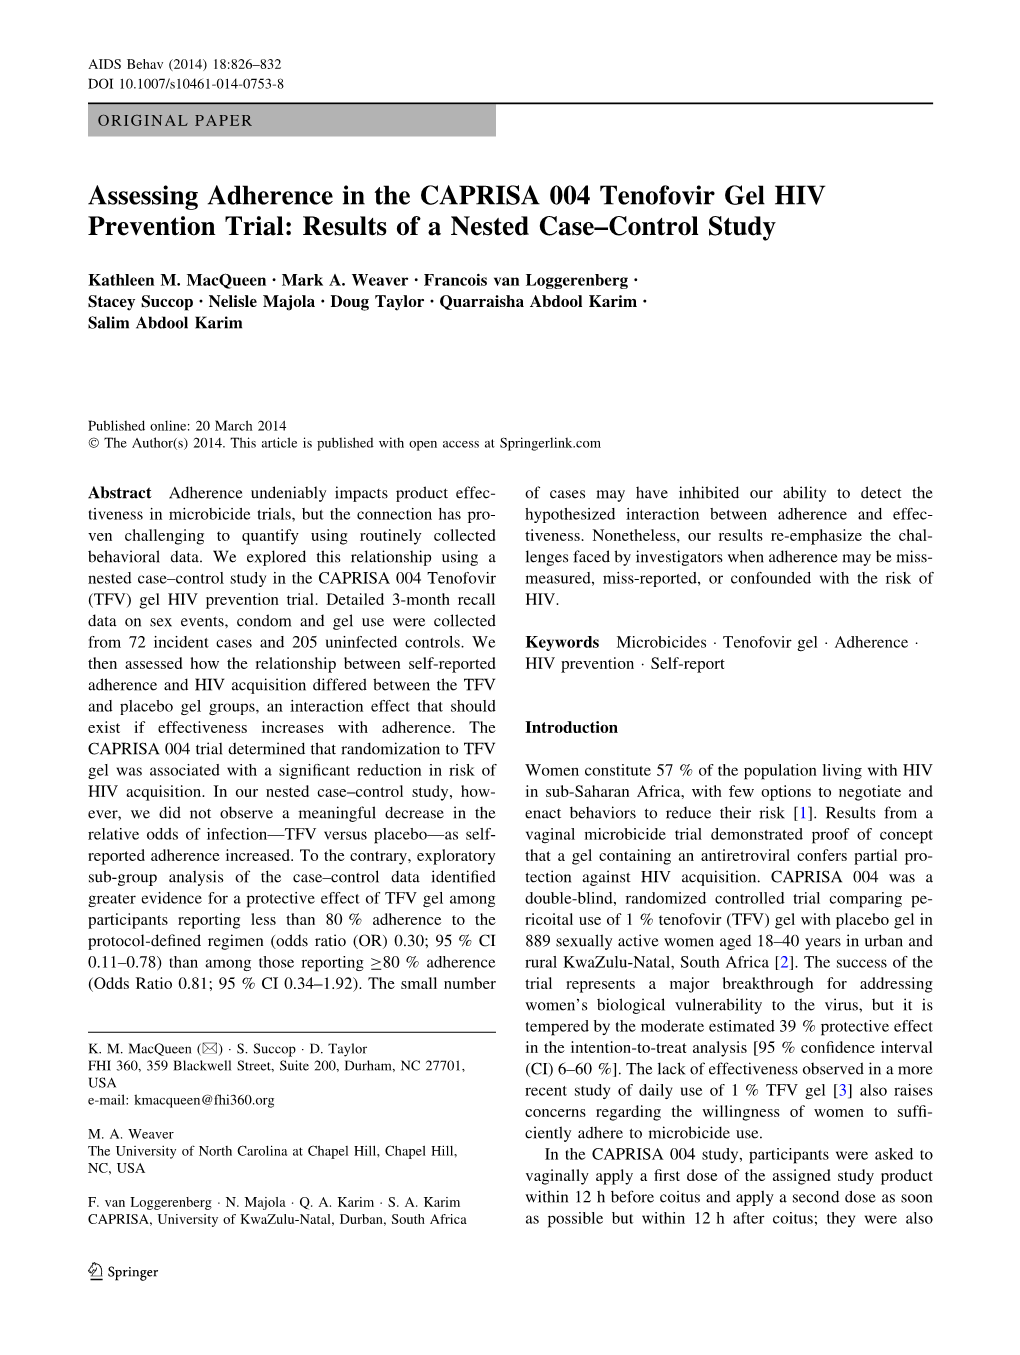 Assessing Adherence in the CAPRISA 004 Tenofovir Gel HIV Prevention Trial: Results of a Nested Case–Control Study